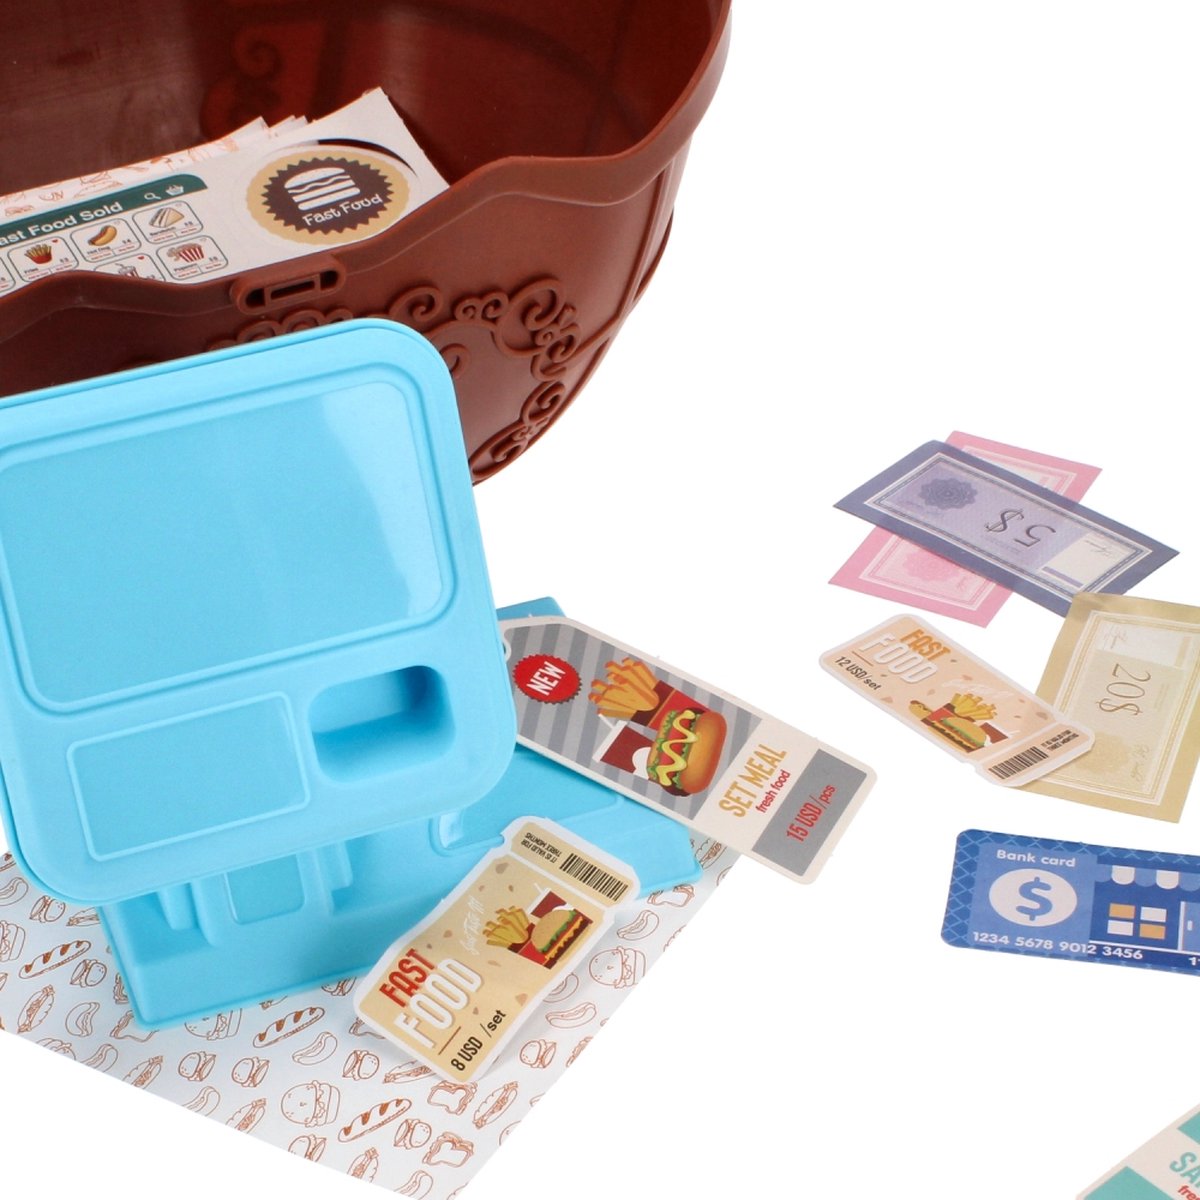 <tc>Ariko</tc>  Toy Suitcase Fast-food shop 58 pieces - hamburgers, popcorn, sauces, tongs and much more - handy take-along suitcase